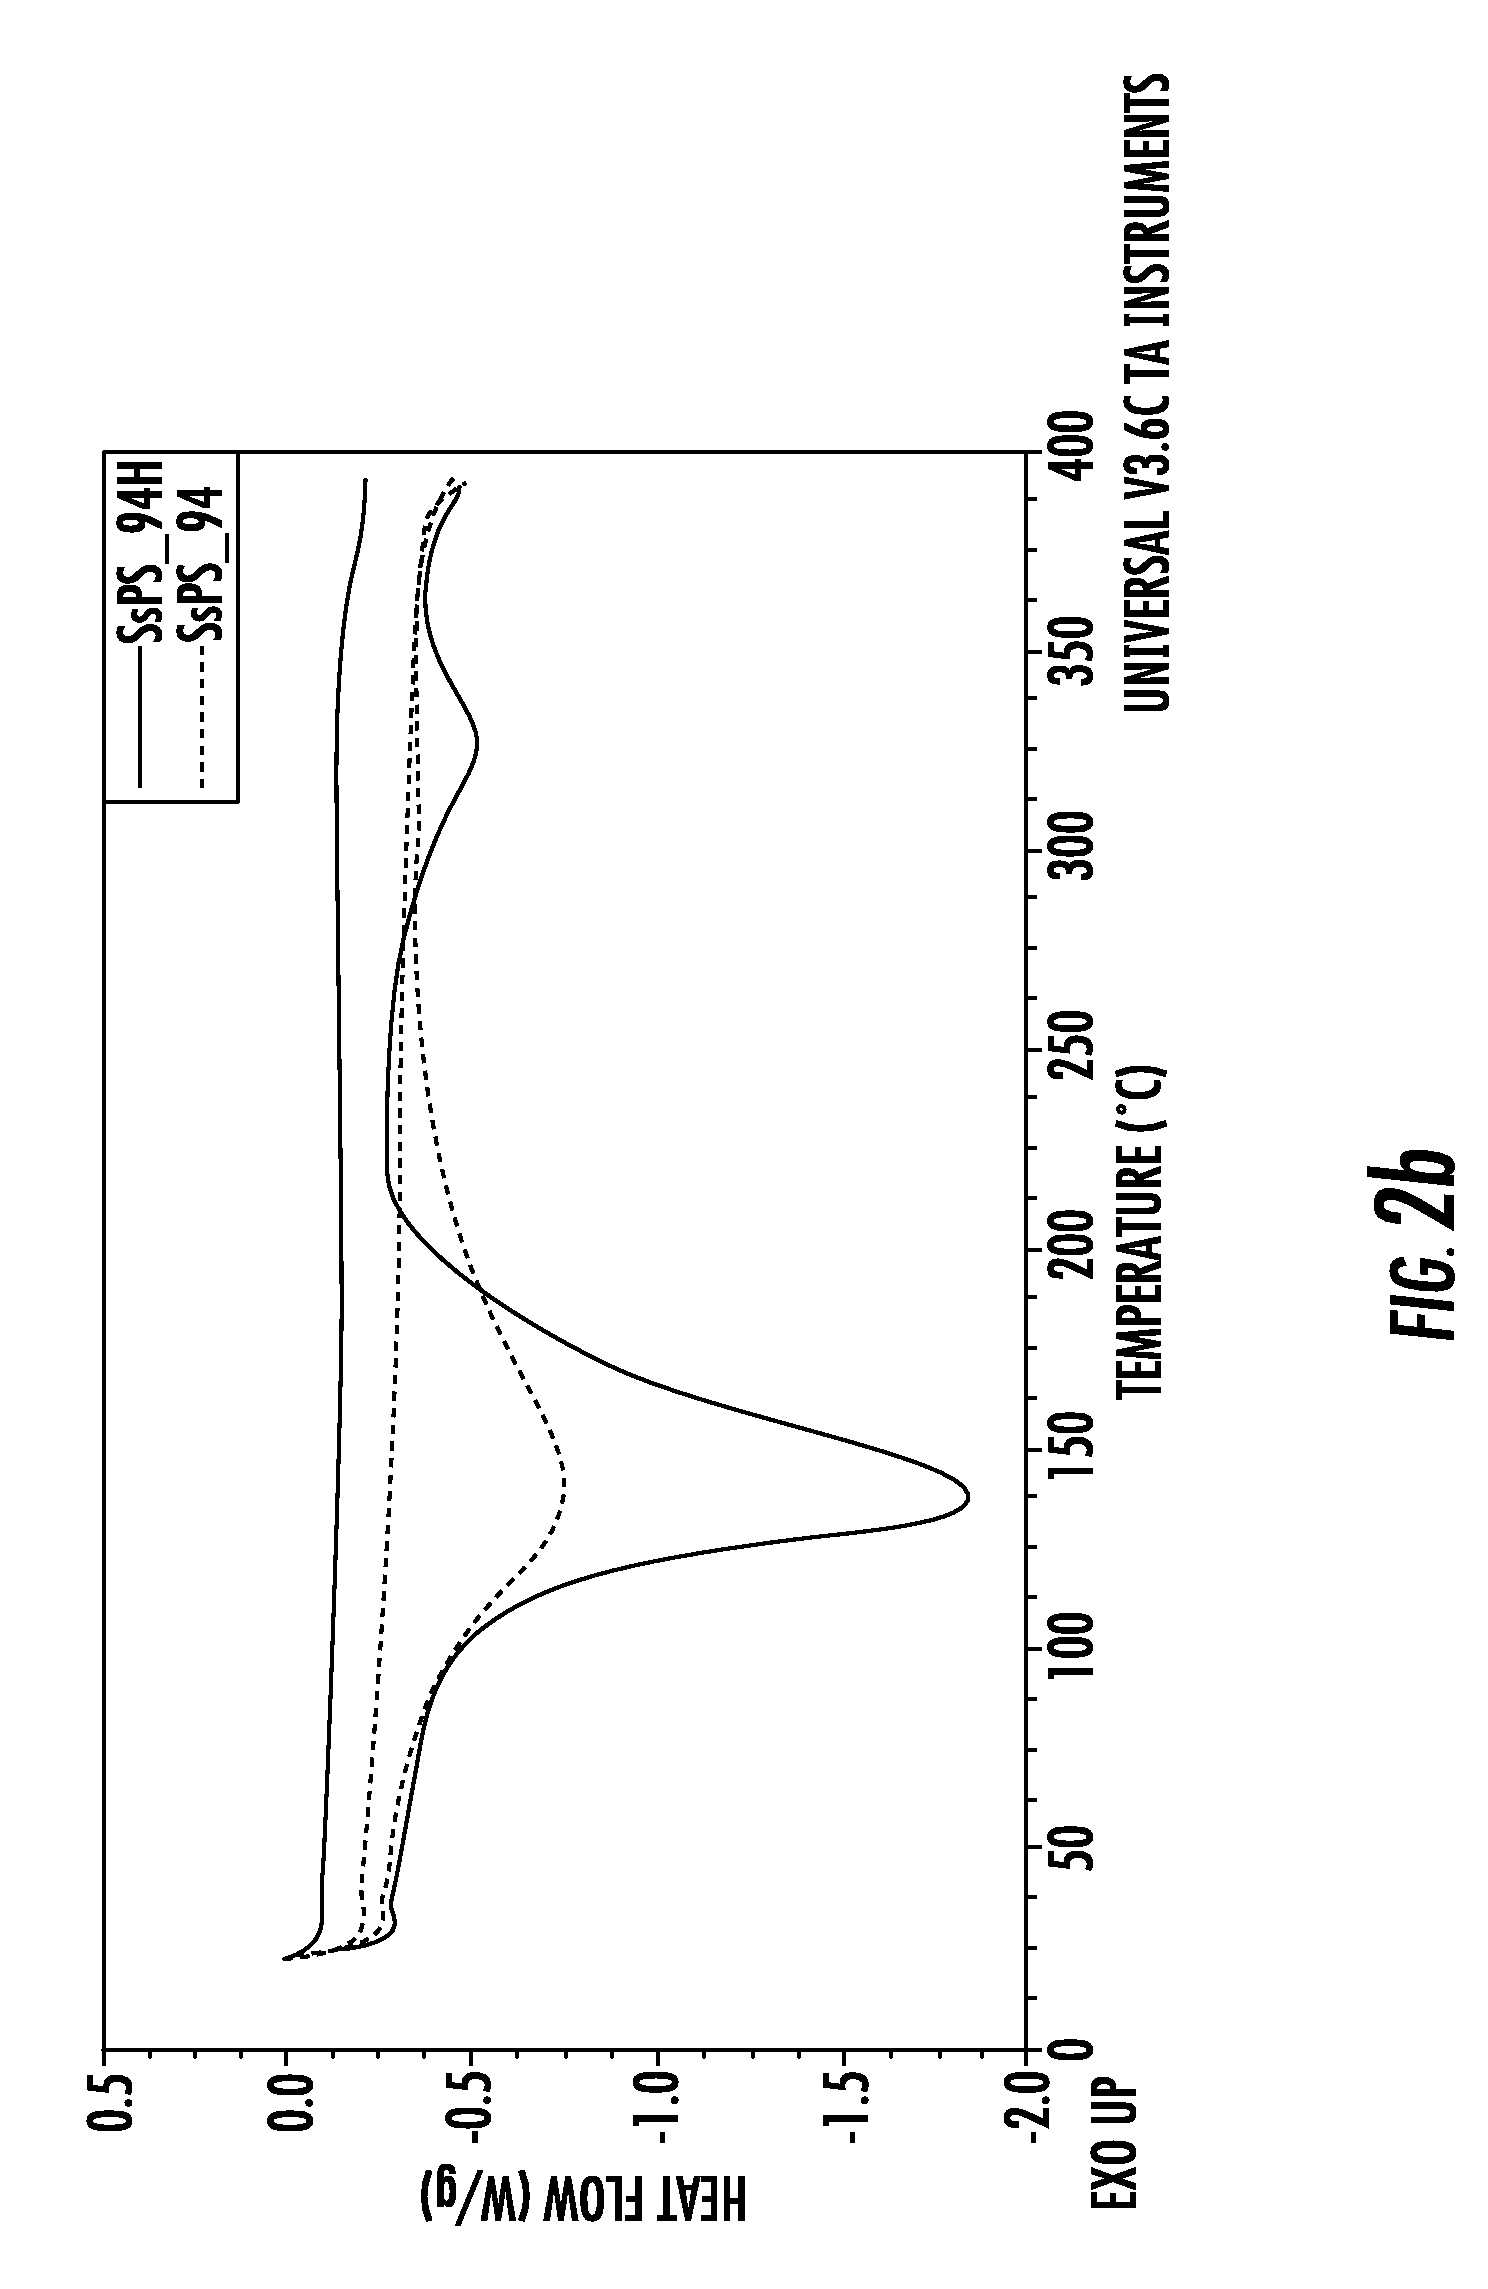 Polyelectrolyte membrane for electrochemical applications, in particular for fuel cells